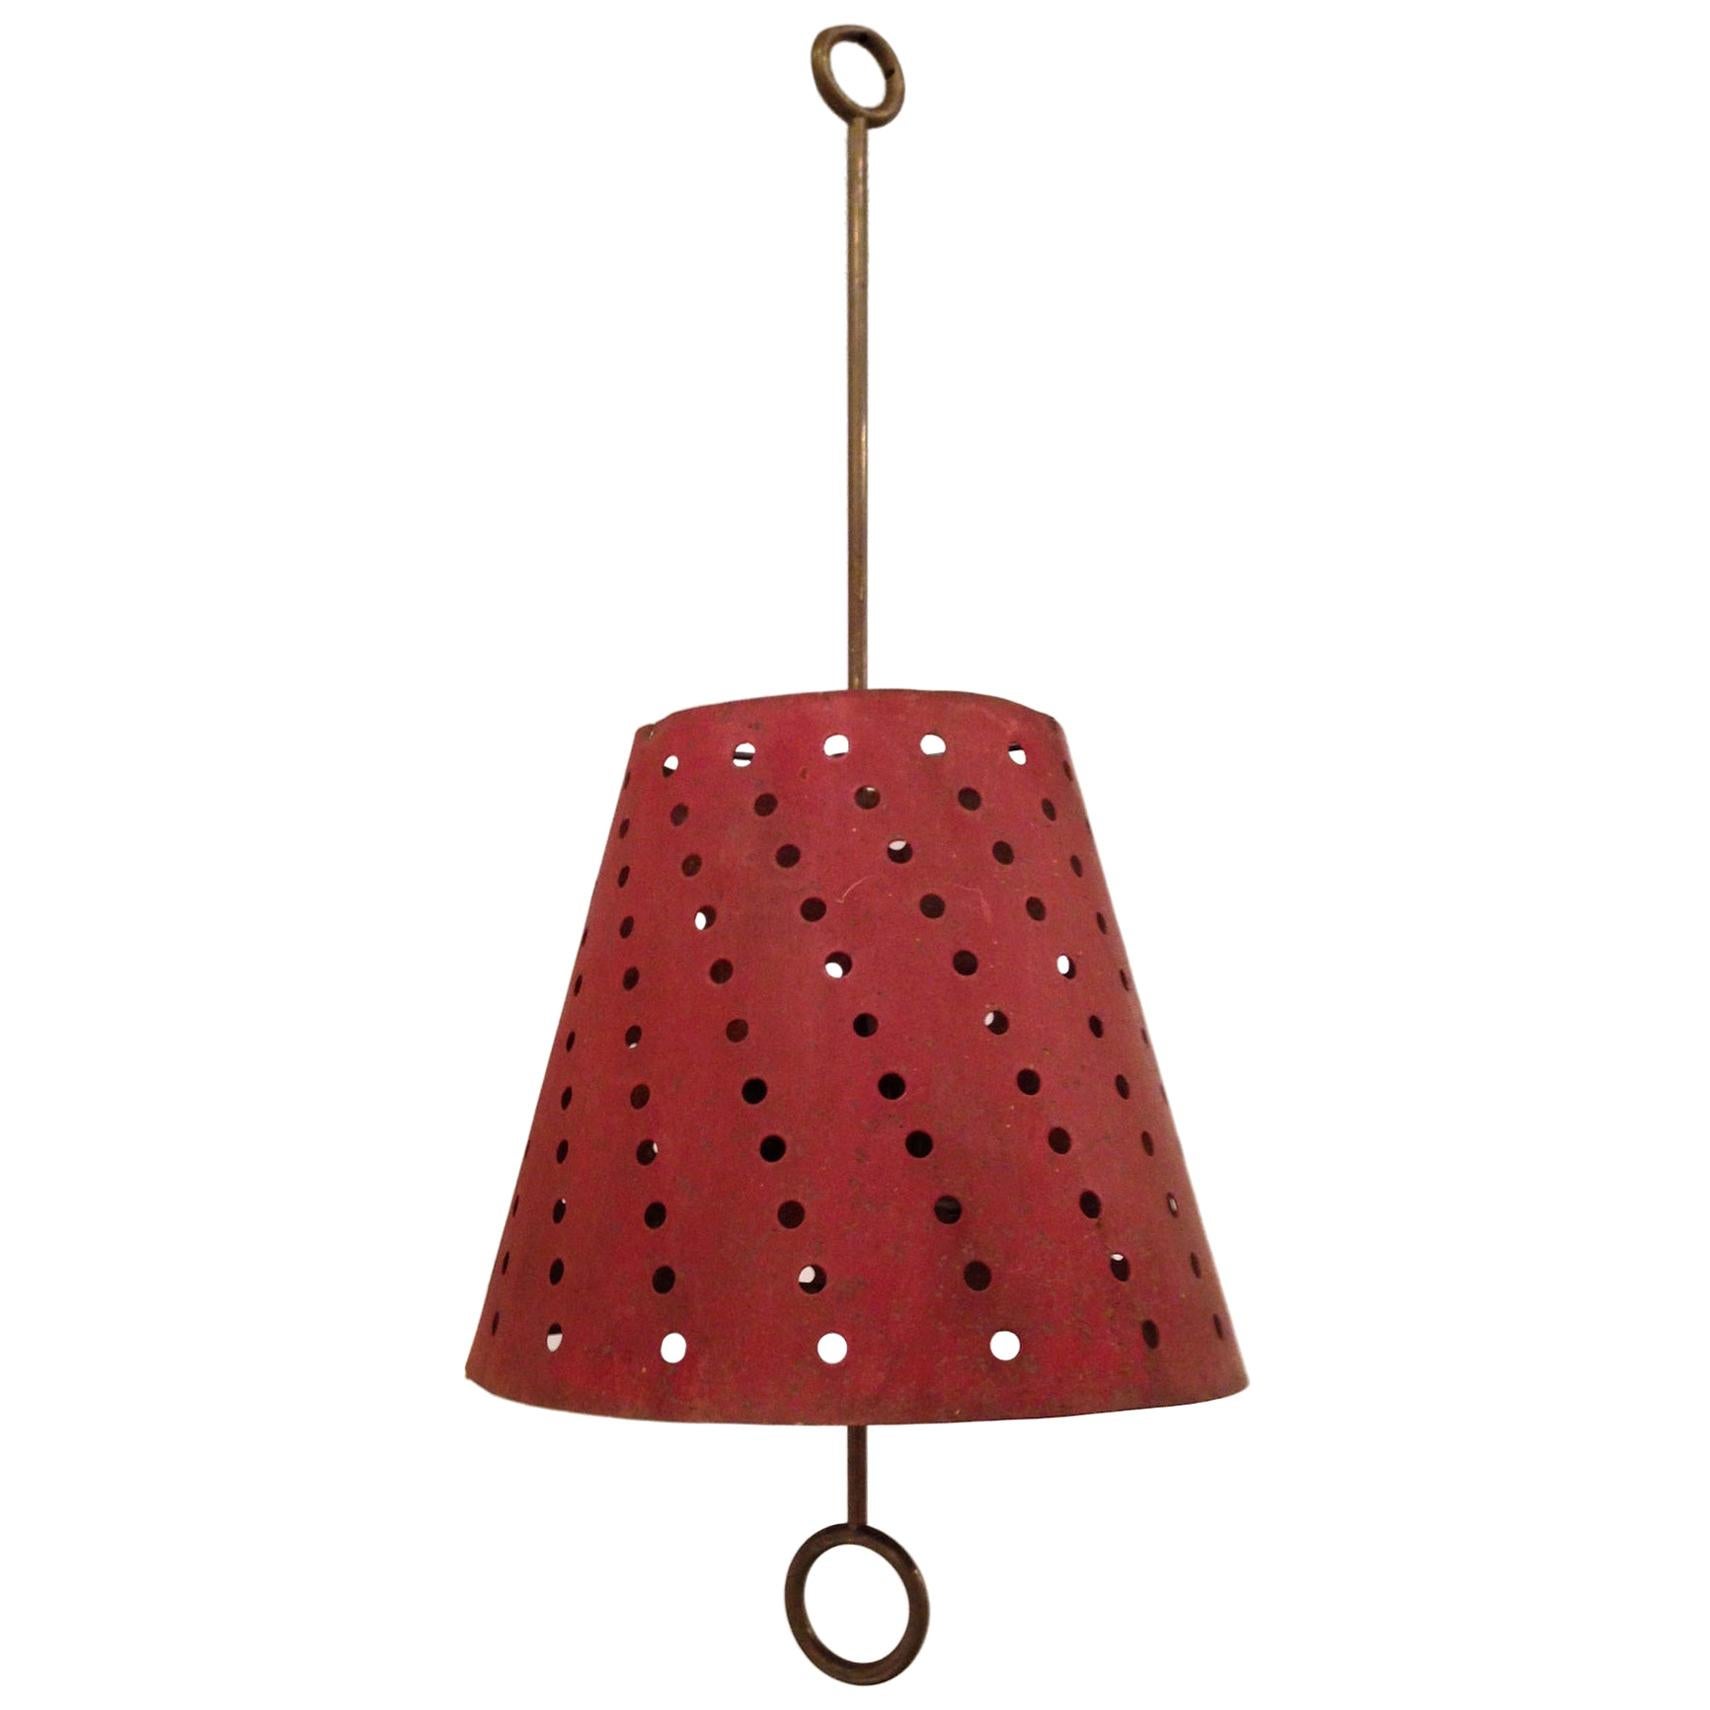 French Hanging Lamp with Perforated Red Shade, 1950s